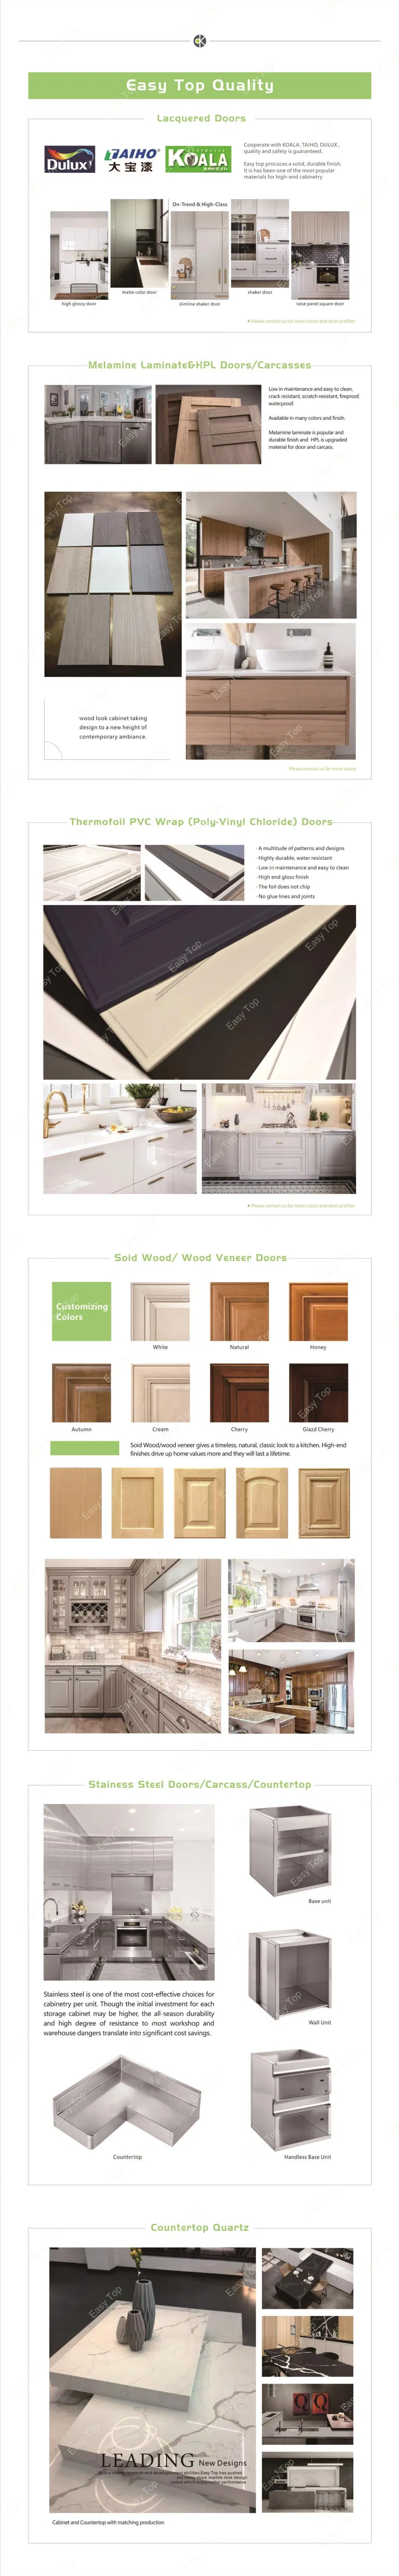 White Shaker Recessed Panel Lacquer Finish Master Bathroom Vanity Cabinets